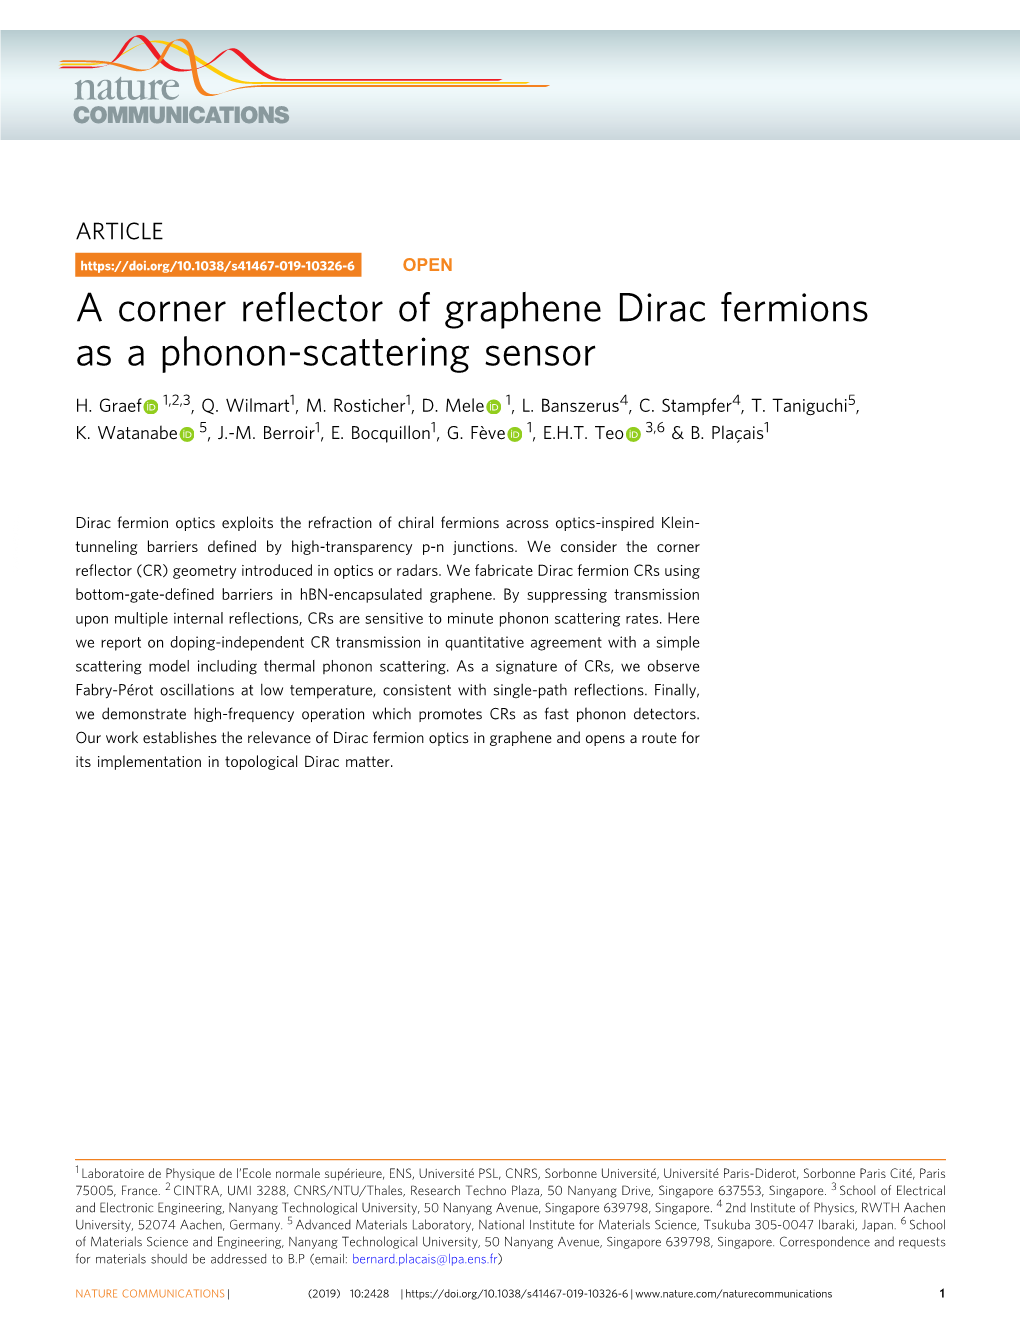 A Corner Reflector of Graphene Dirac Fermions As a Phonon-Scattering